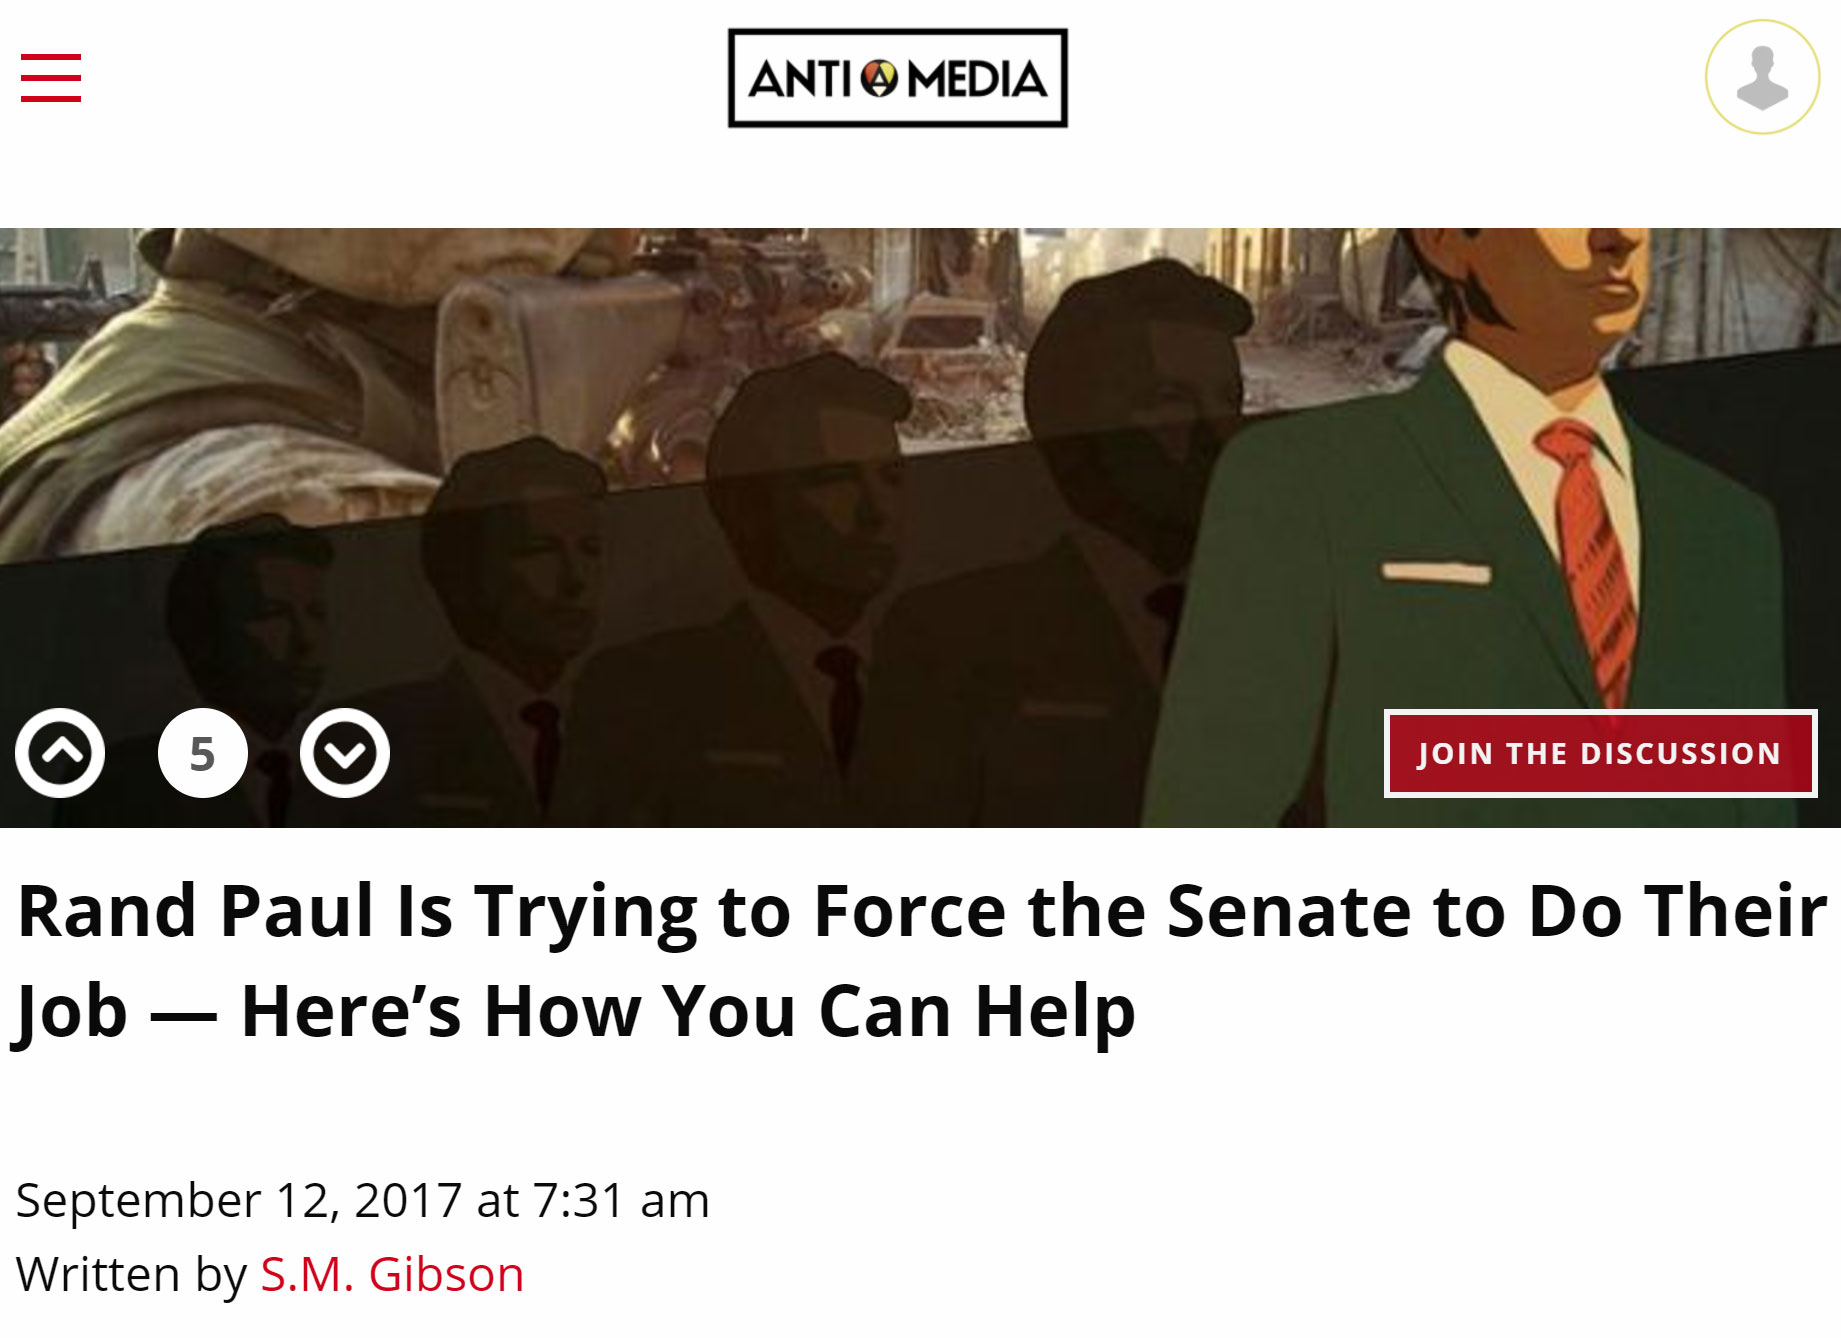 13-Rand-Paul-Is-Trying-to-Force-the-Senate-to-Do-Their-Job.jpg